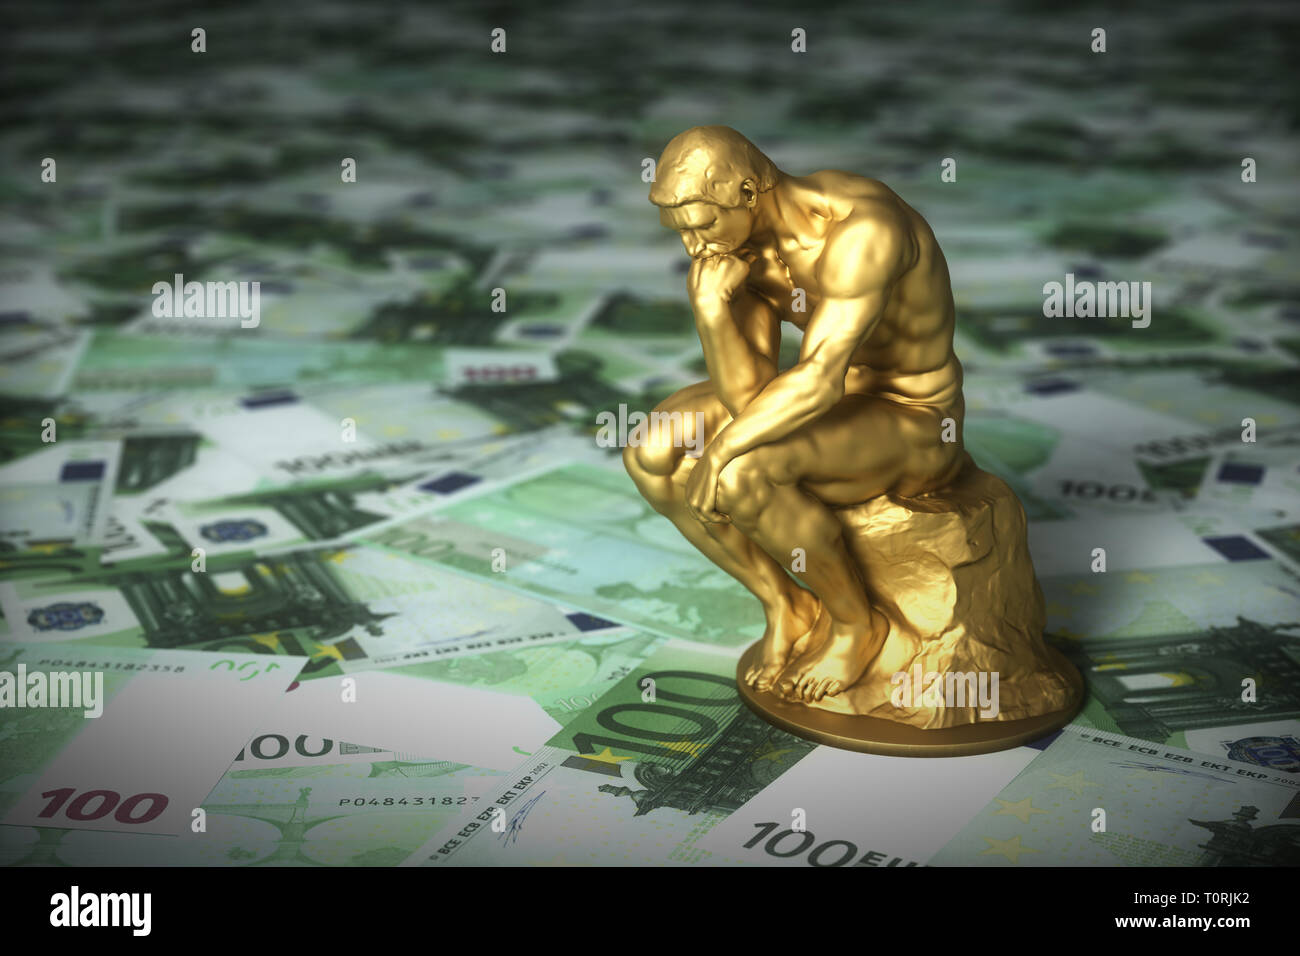 Golden Sculpture Of A Thinker Who Thinks Over Euro Banknotes. 3D Illustration. Stock Photo